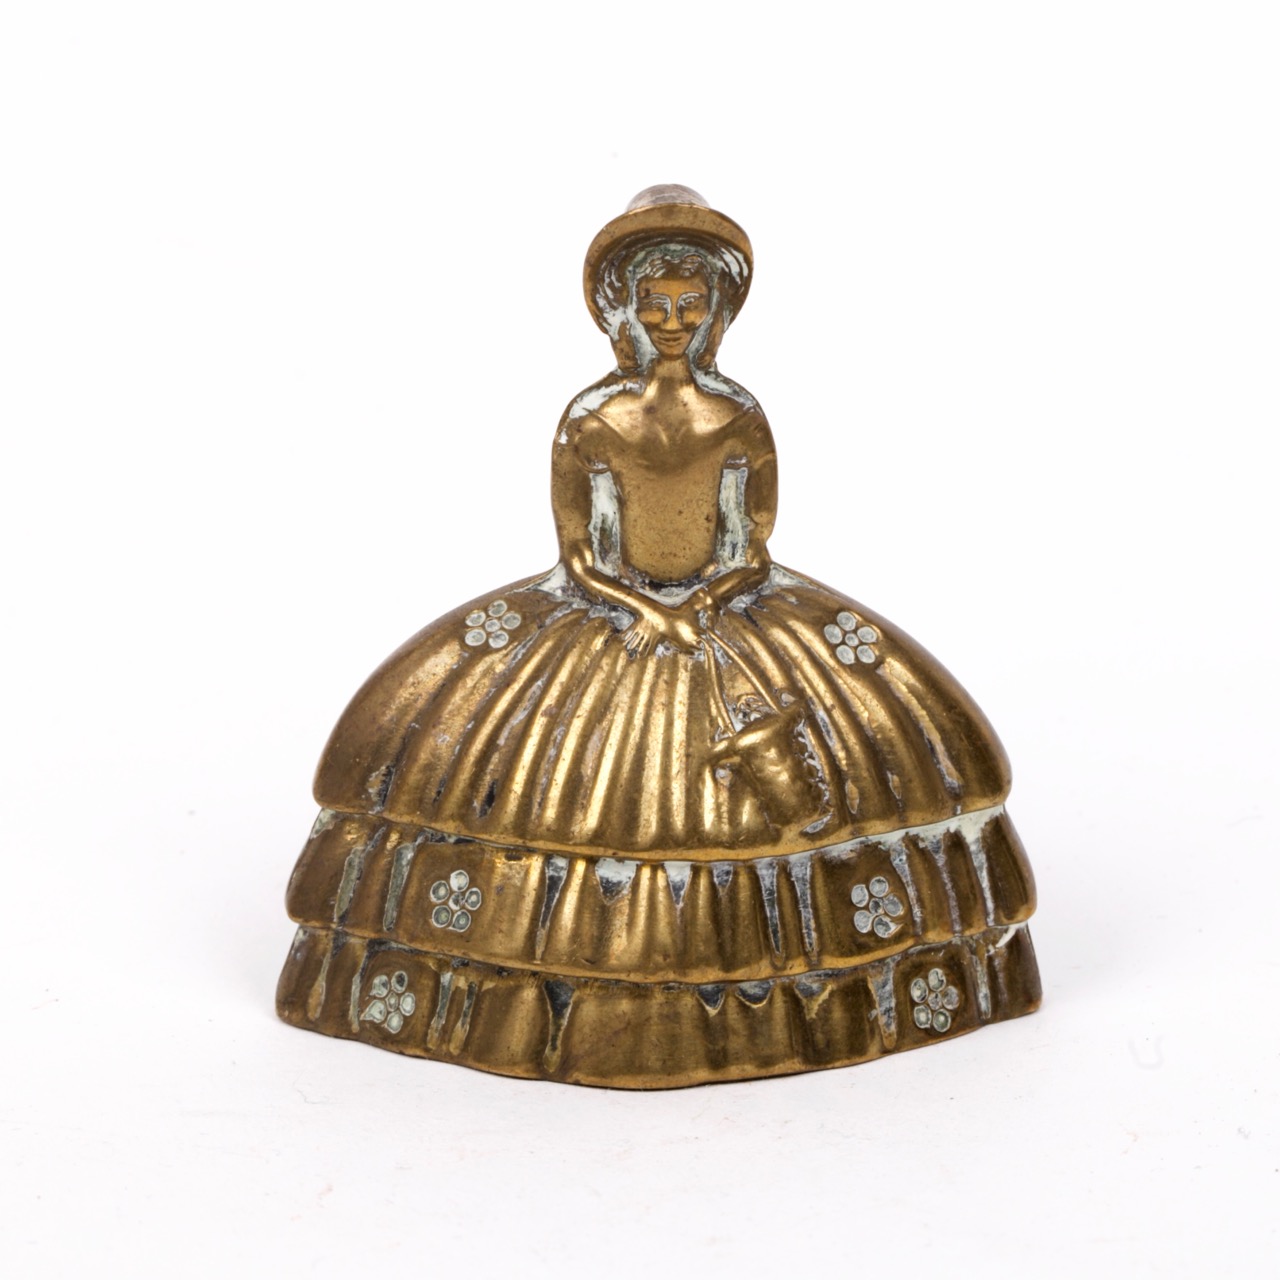 Antique brass bell in a shape of a woman